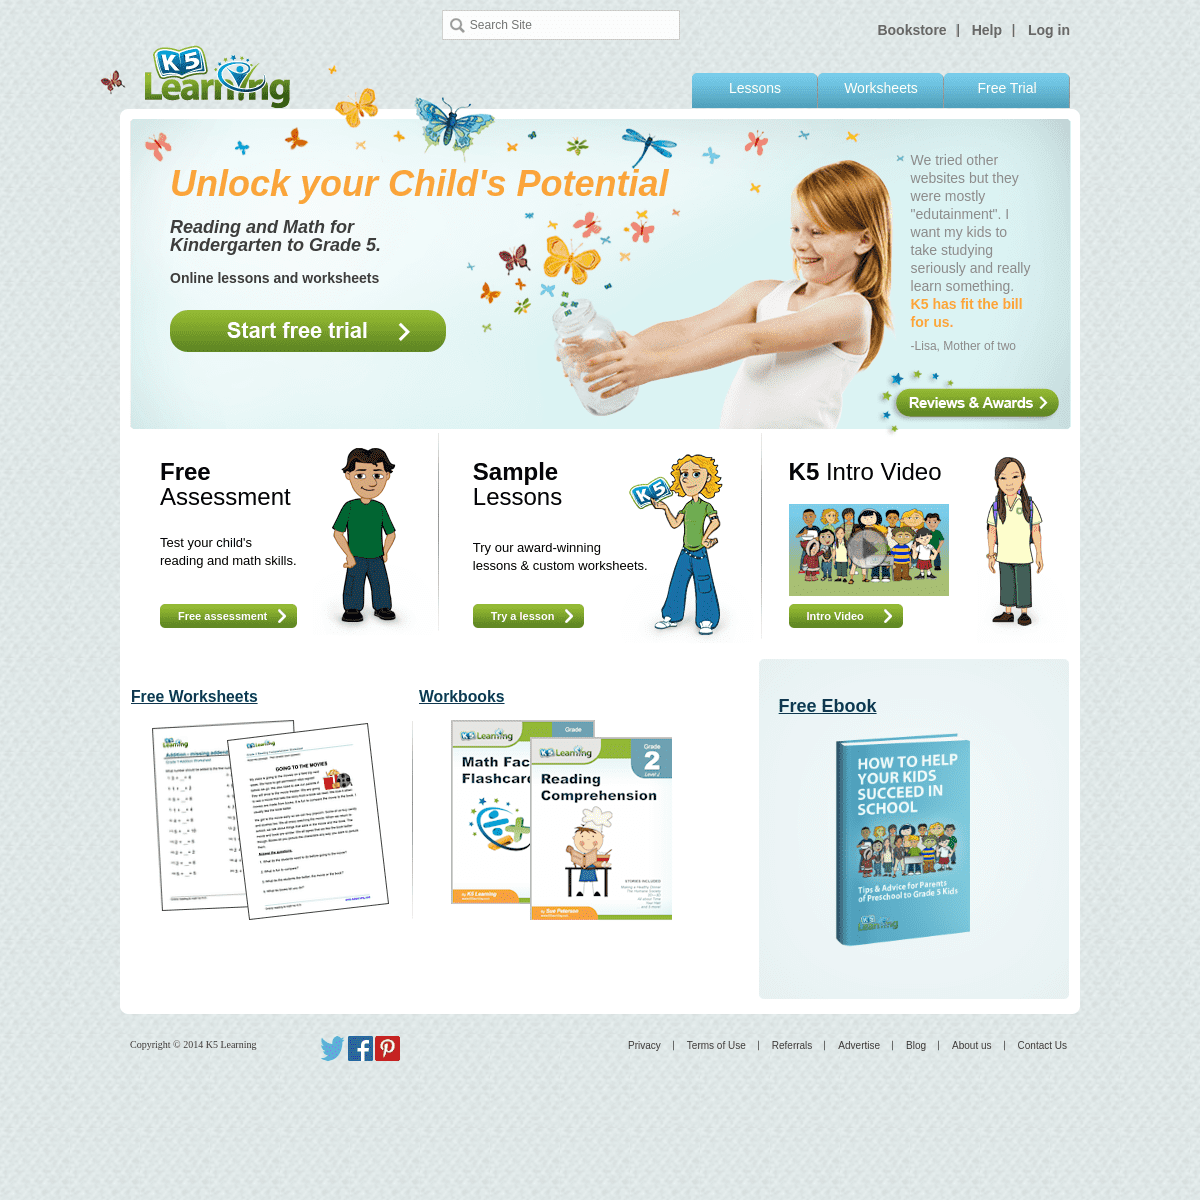 A complete backup of k5learning.com